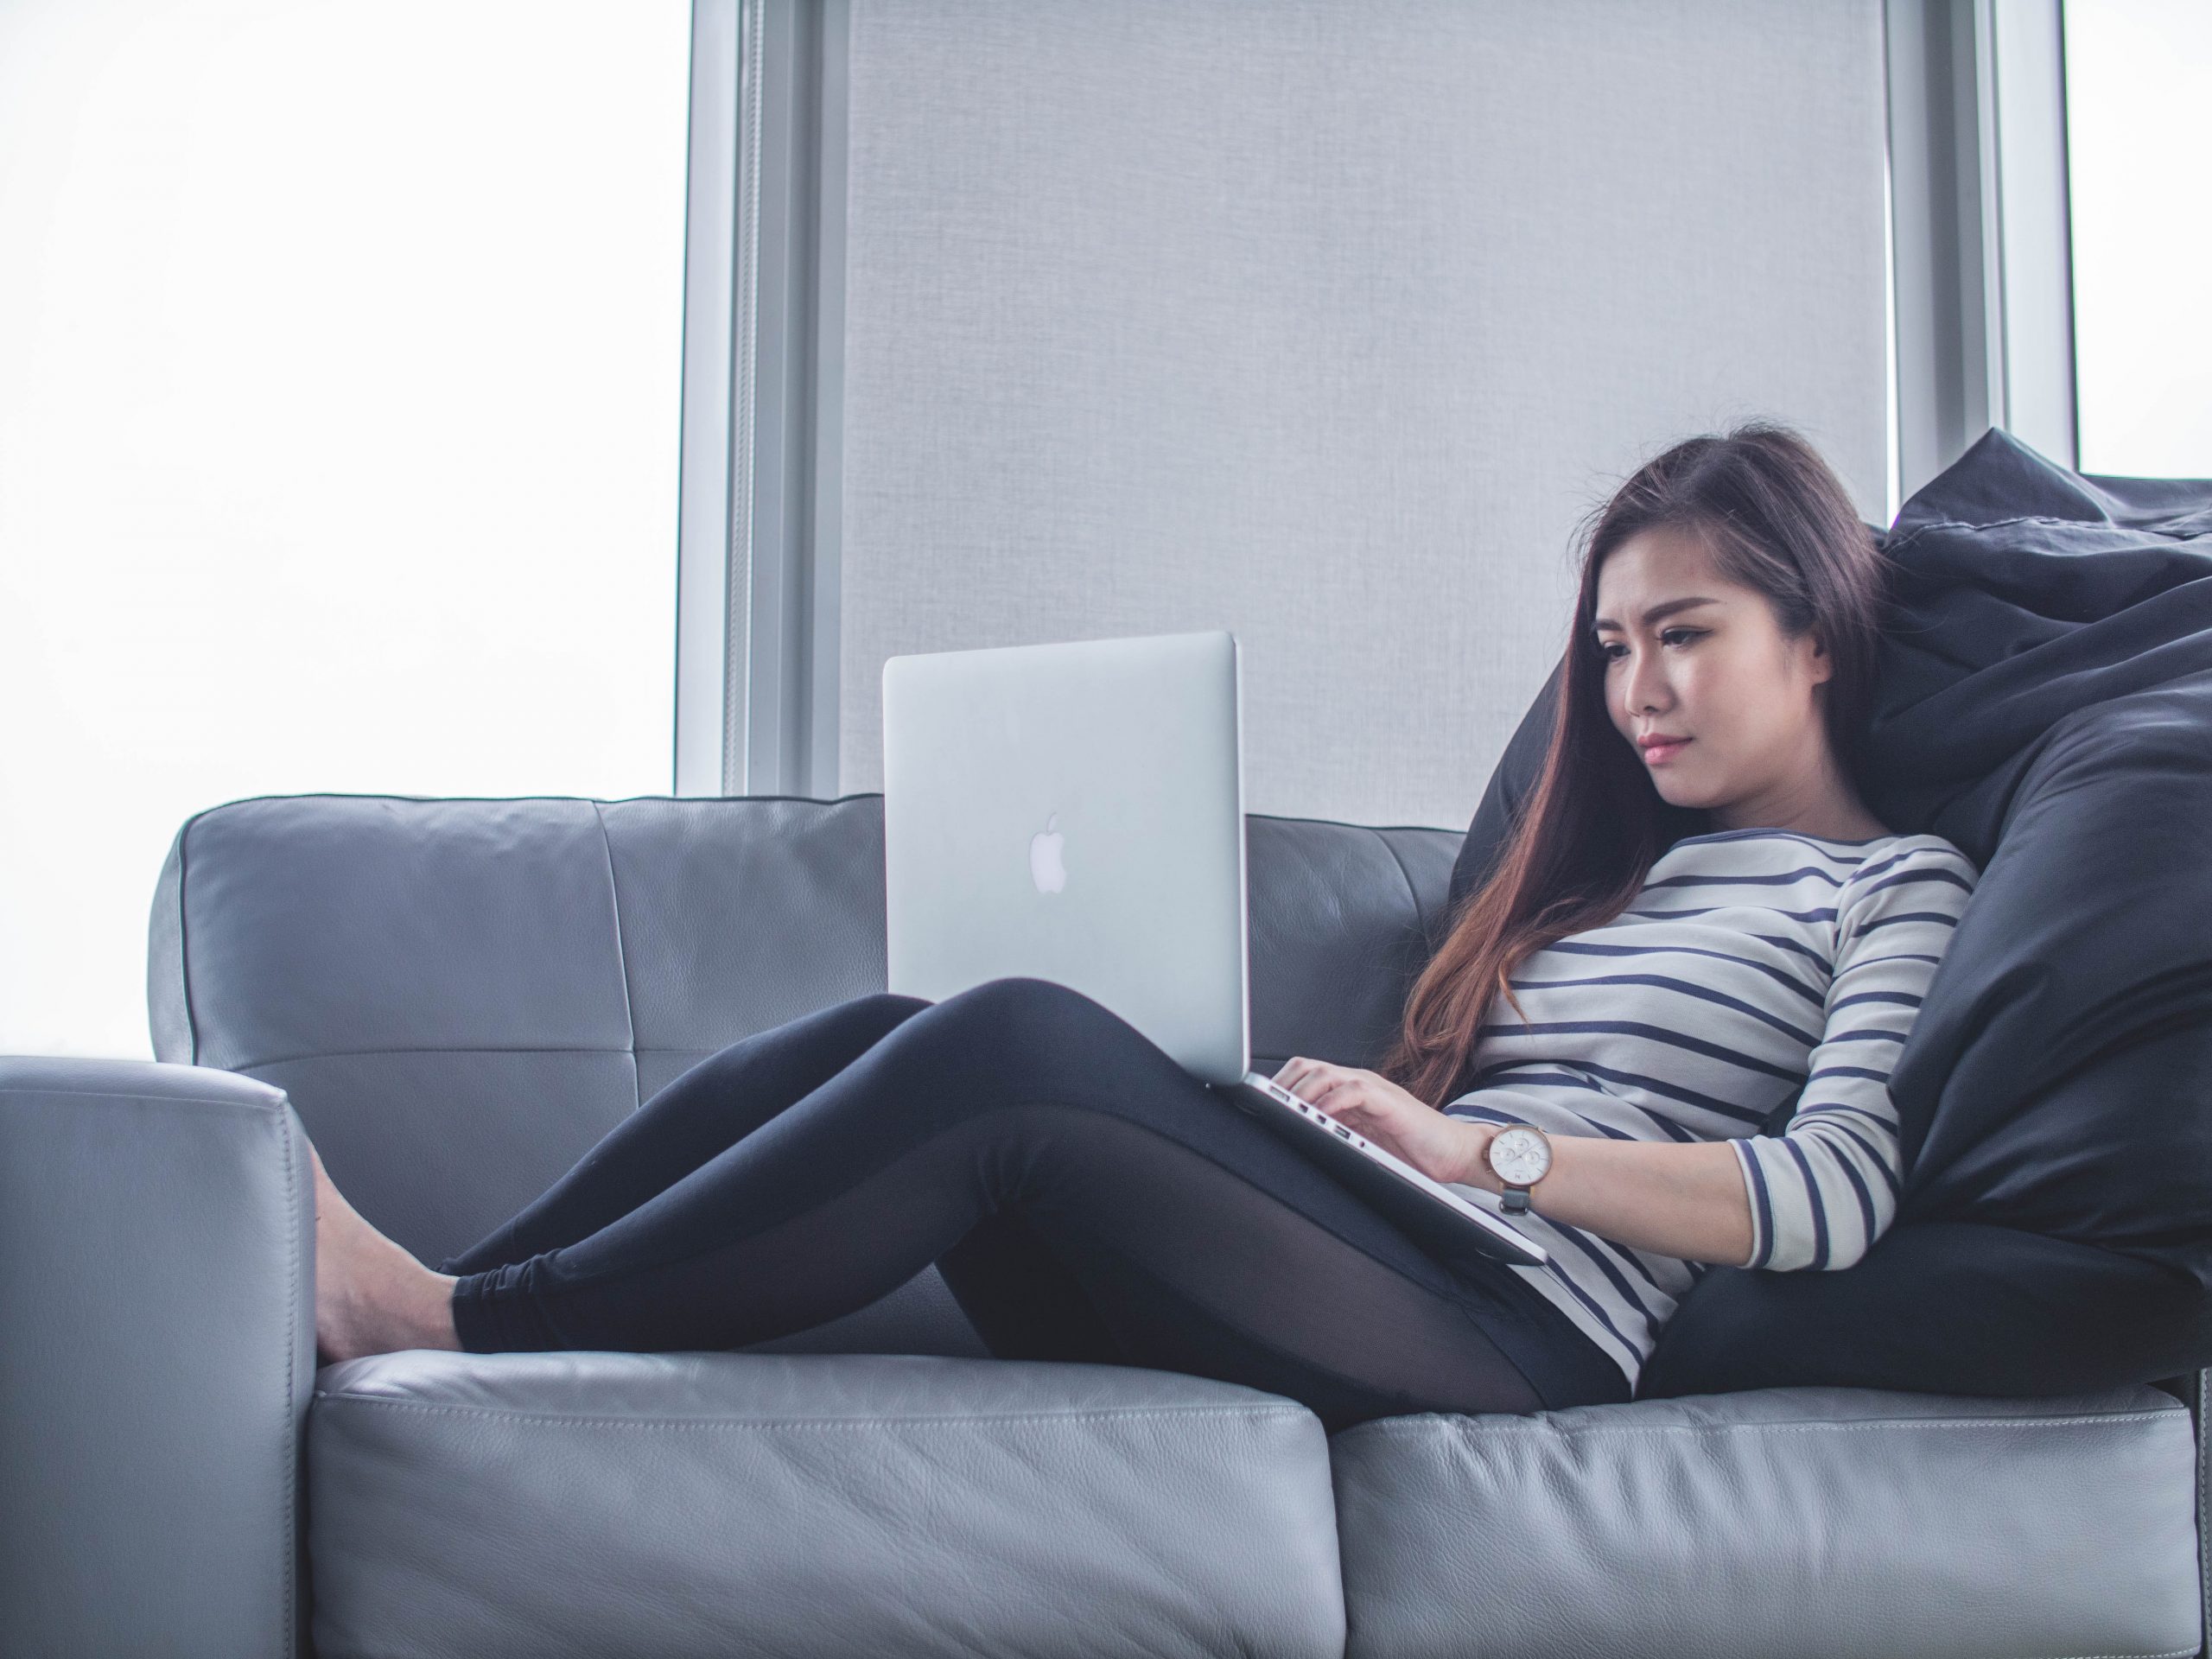 A young woman sits on a sofa wearing black trousers and a black and white striped top. She is working on a laptop